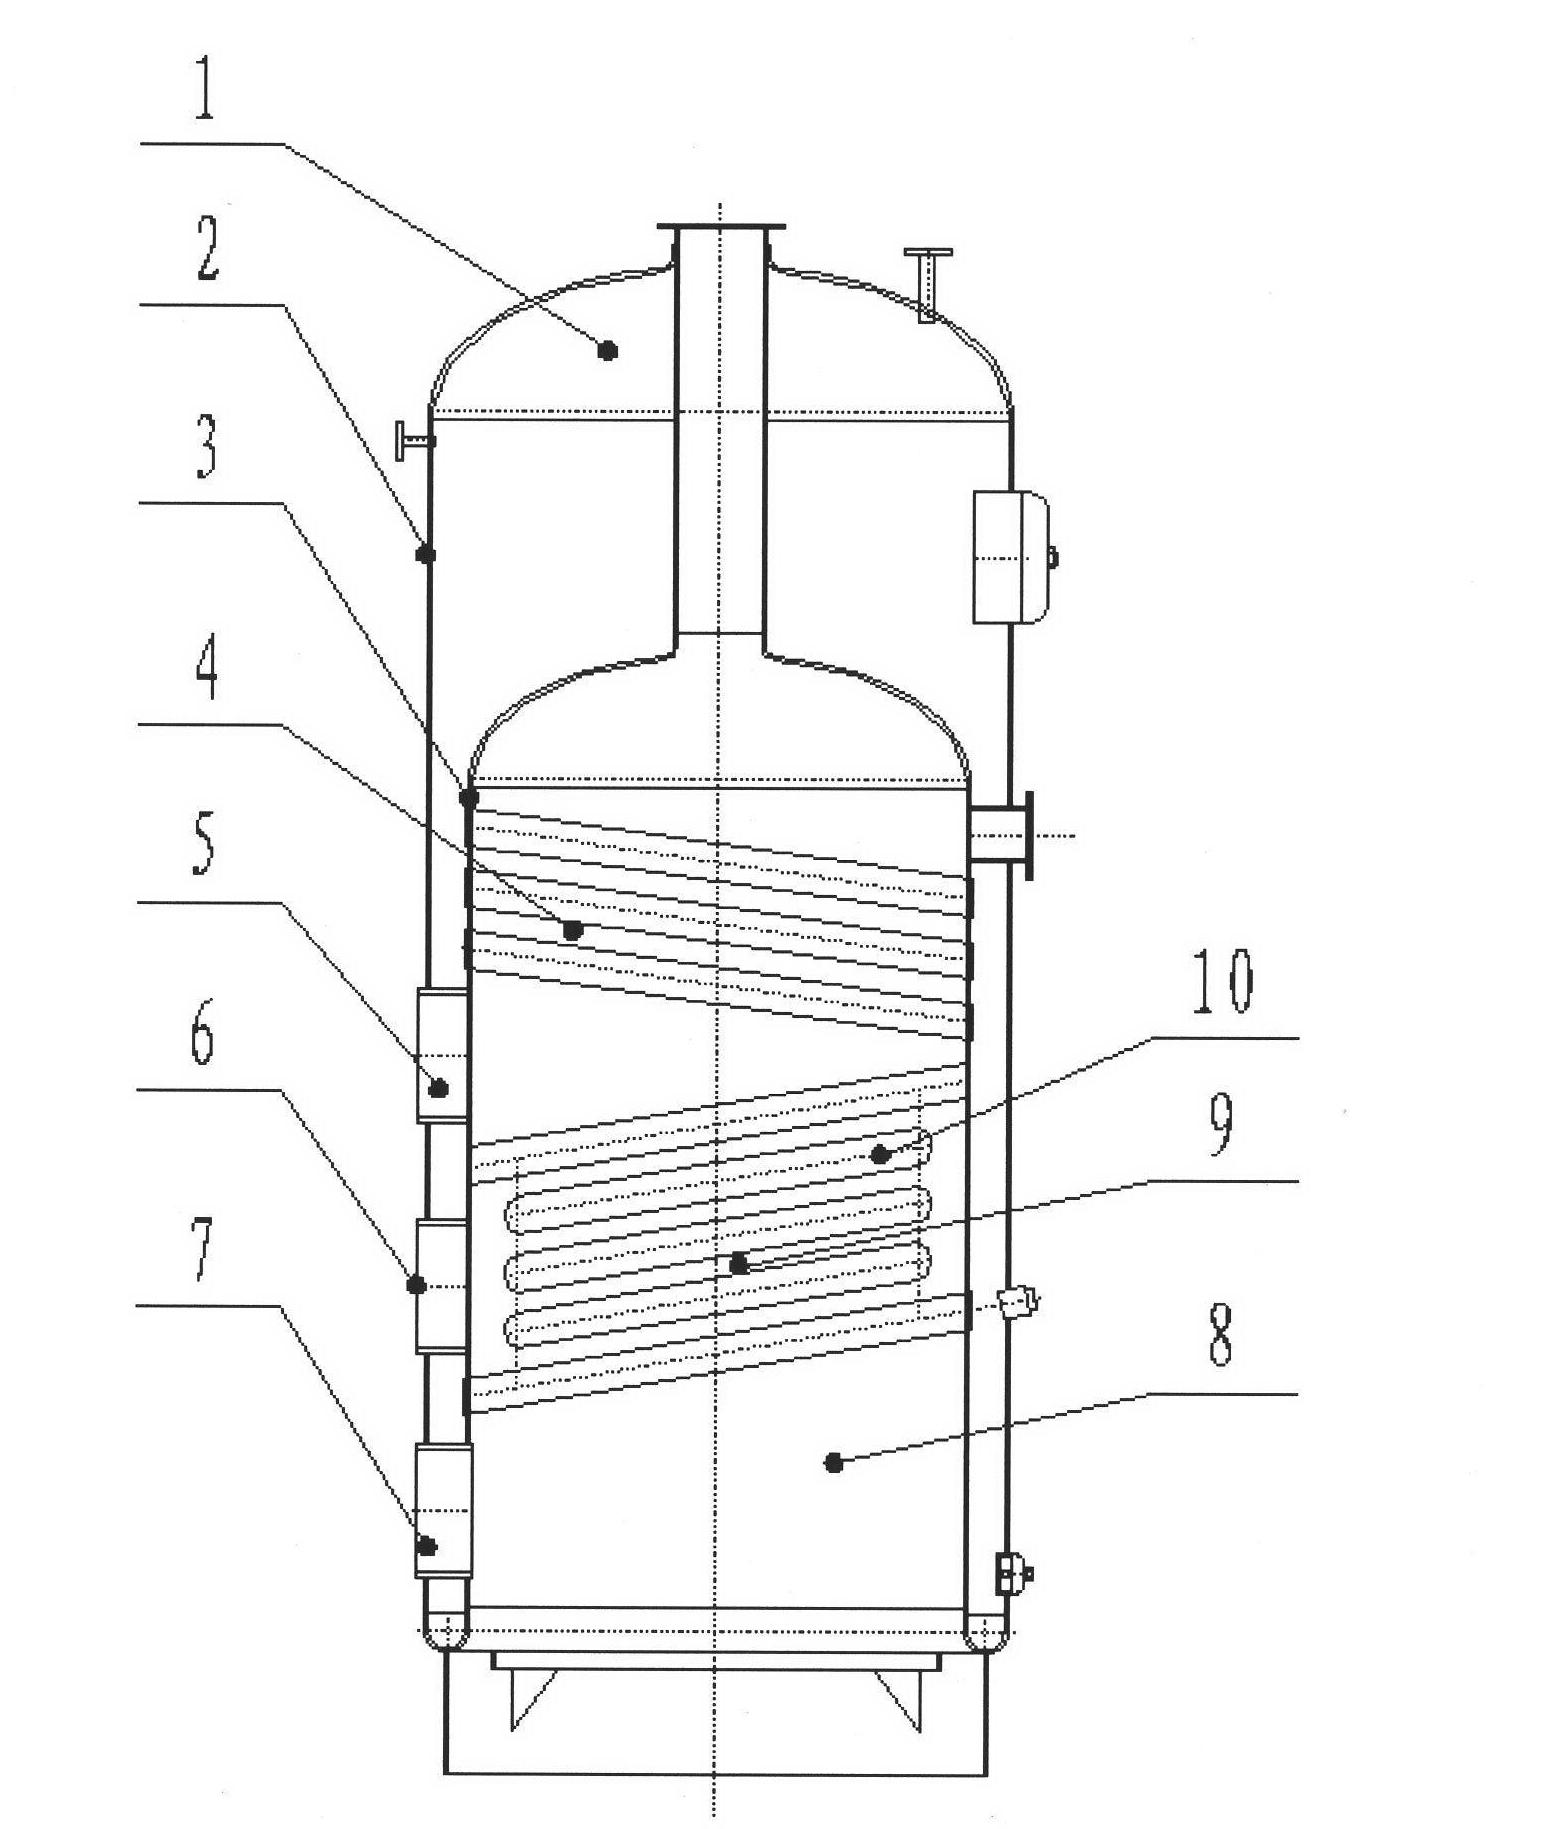 Heating system using biomass as boiler fuel and vertical energy-saving boiler